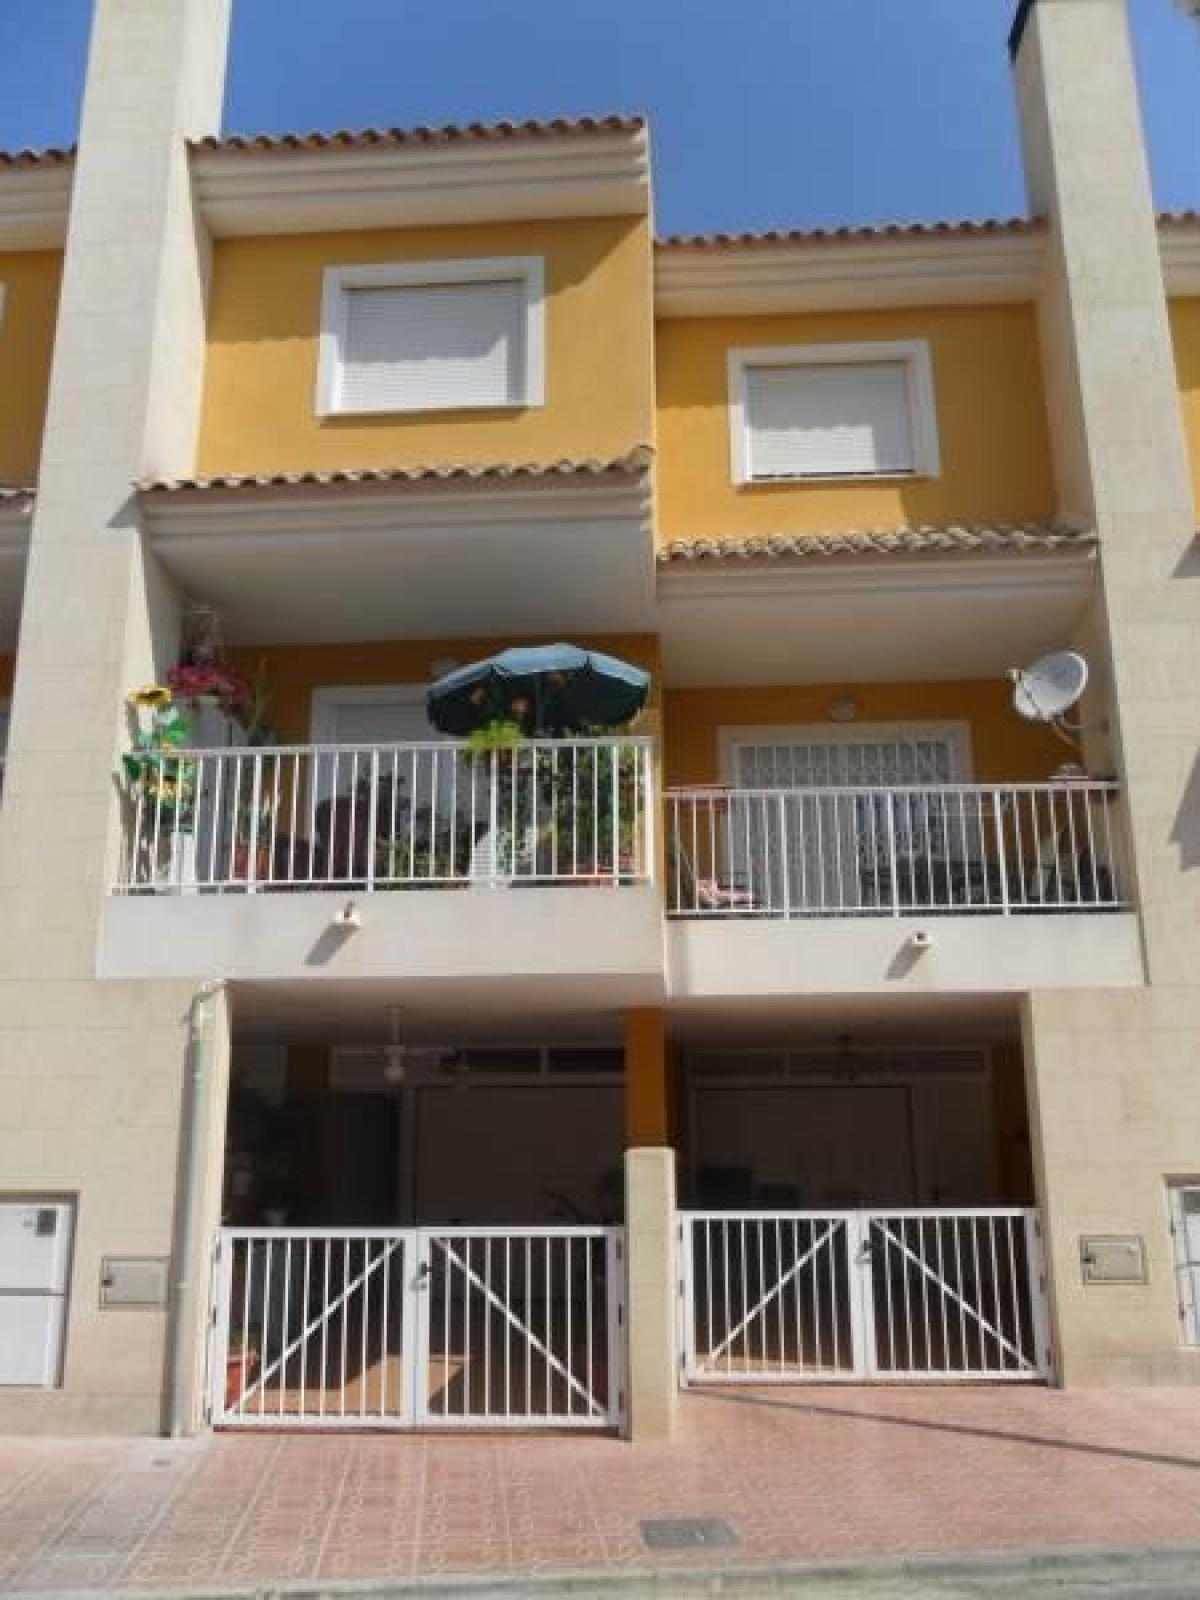 Picture of Bungalow For Sale in Rojales, Alicante, Spain